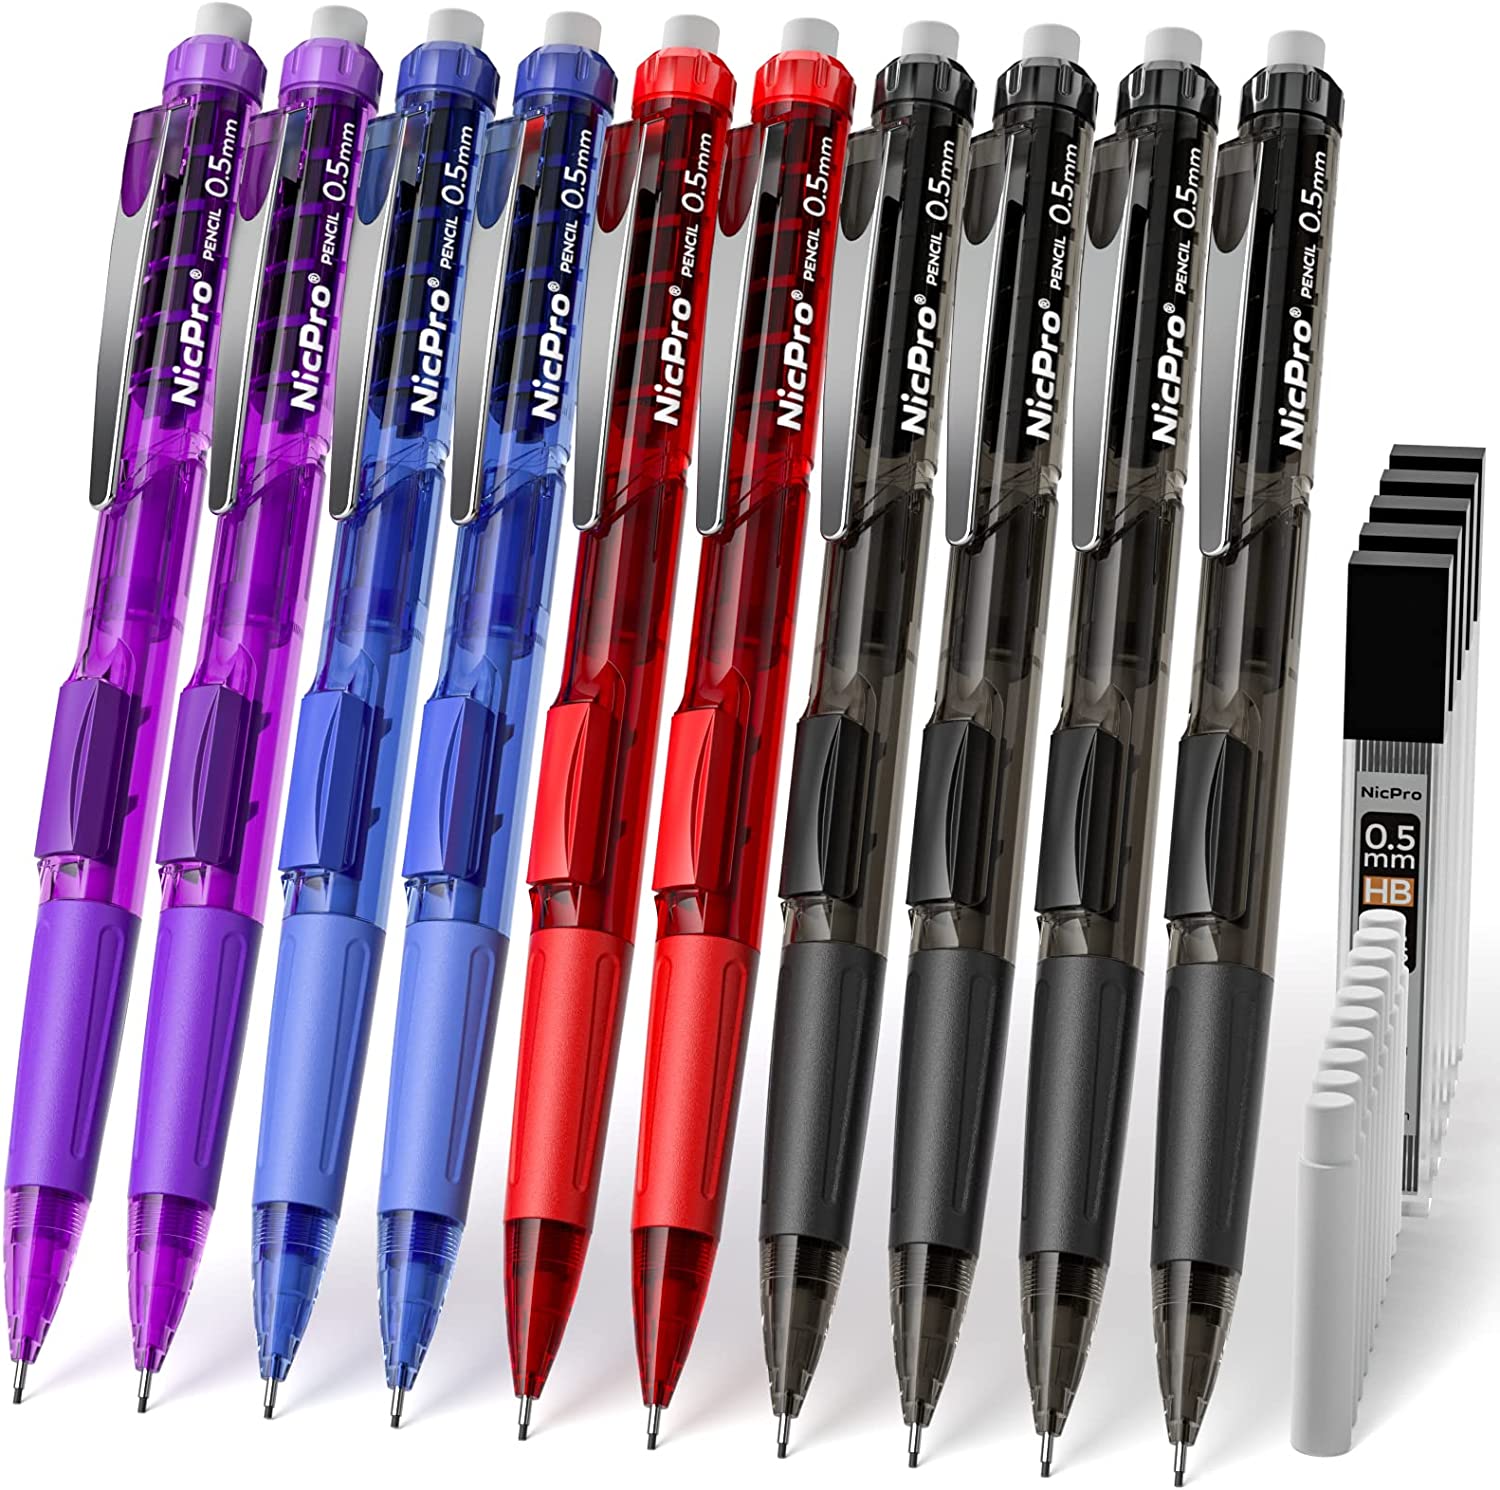 Nicpro 13PCS Pastel Gel Ink Pen Set with Case, 1 Highlighter Cute 0.5mm  Fine Point Retractable 12PCS Black, Aesthetic Pens for School Student Note